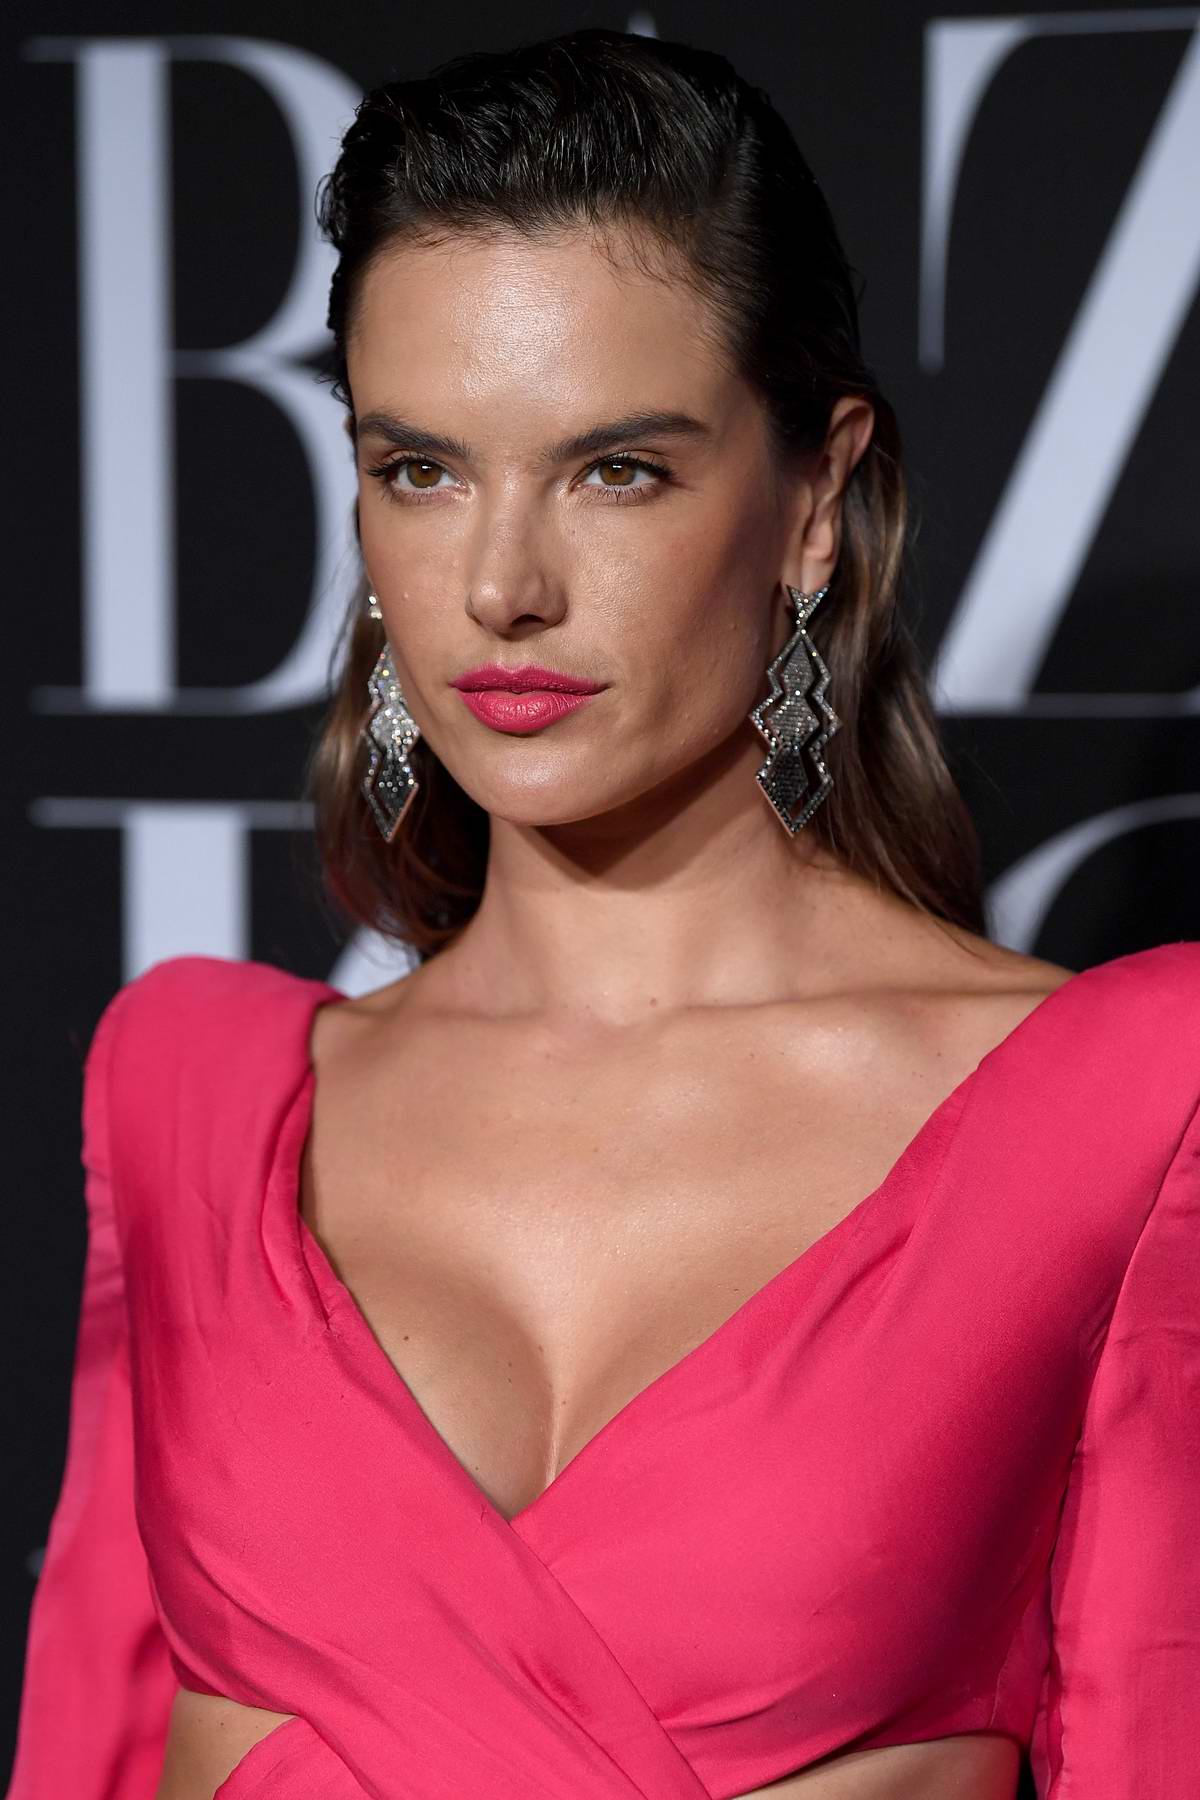 alessandra ambrosio attends the 2019 harper's bazaar icons party at the  plaza hotel in new york city-060919_10